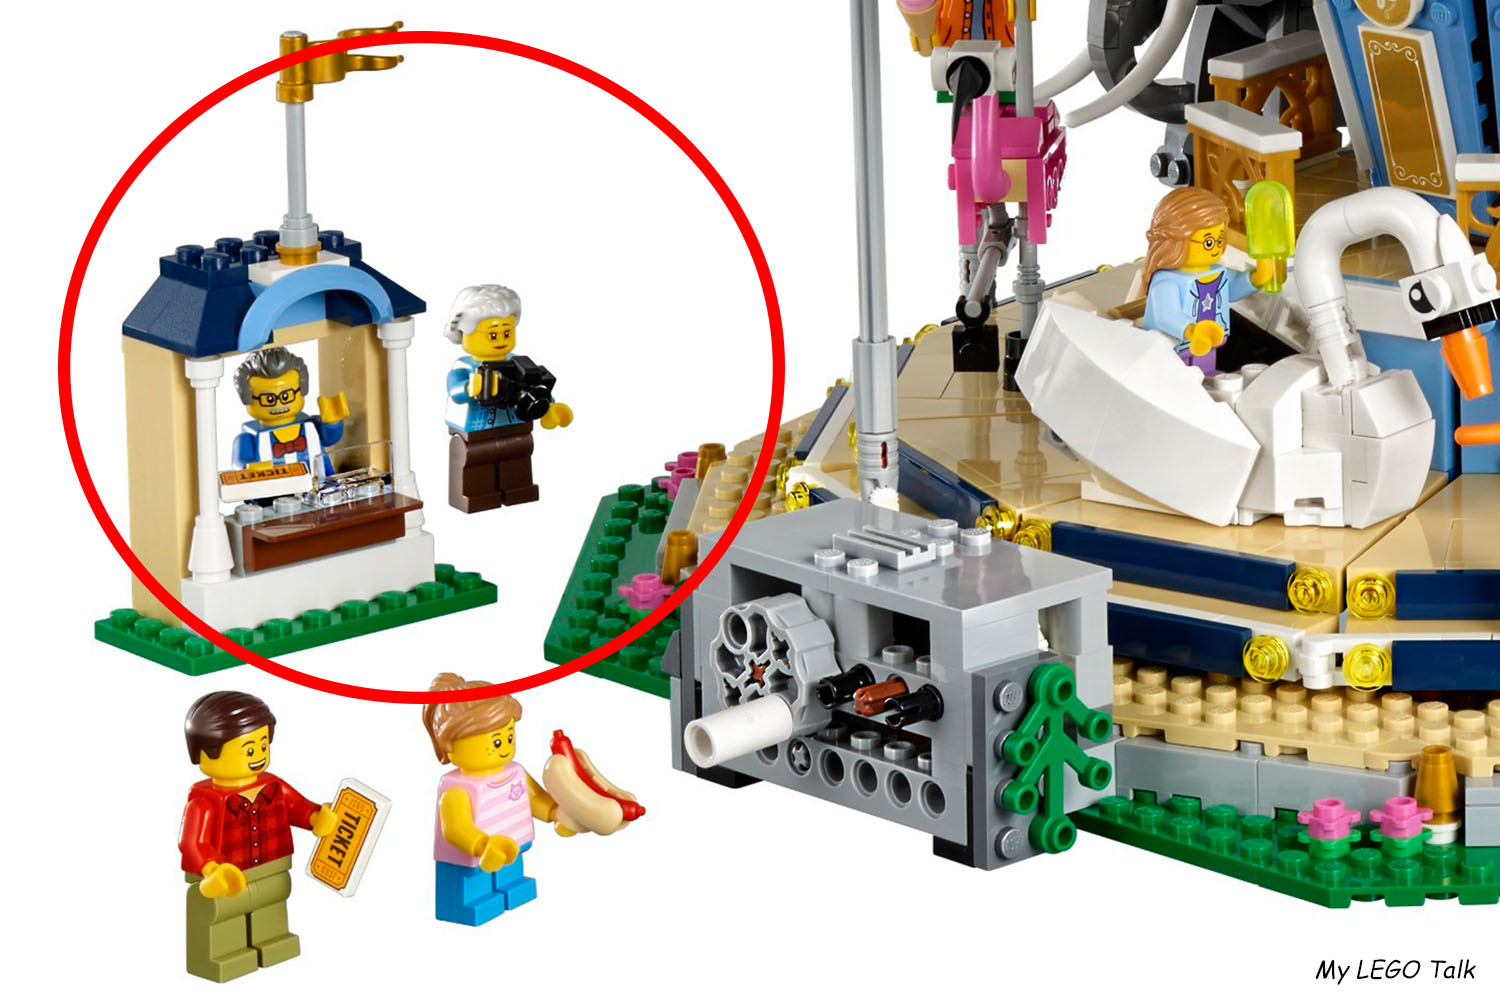 Carousel 10257 vs. Grand Carousel 10196 - 8 differences :-) - My Lego